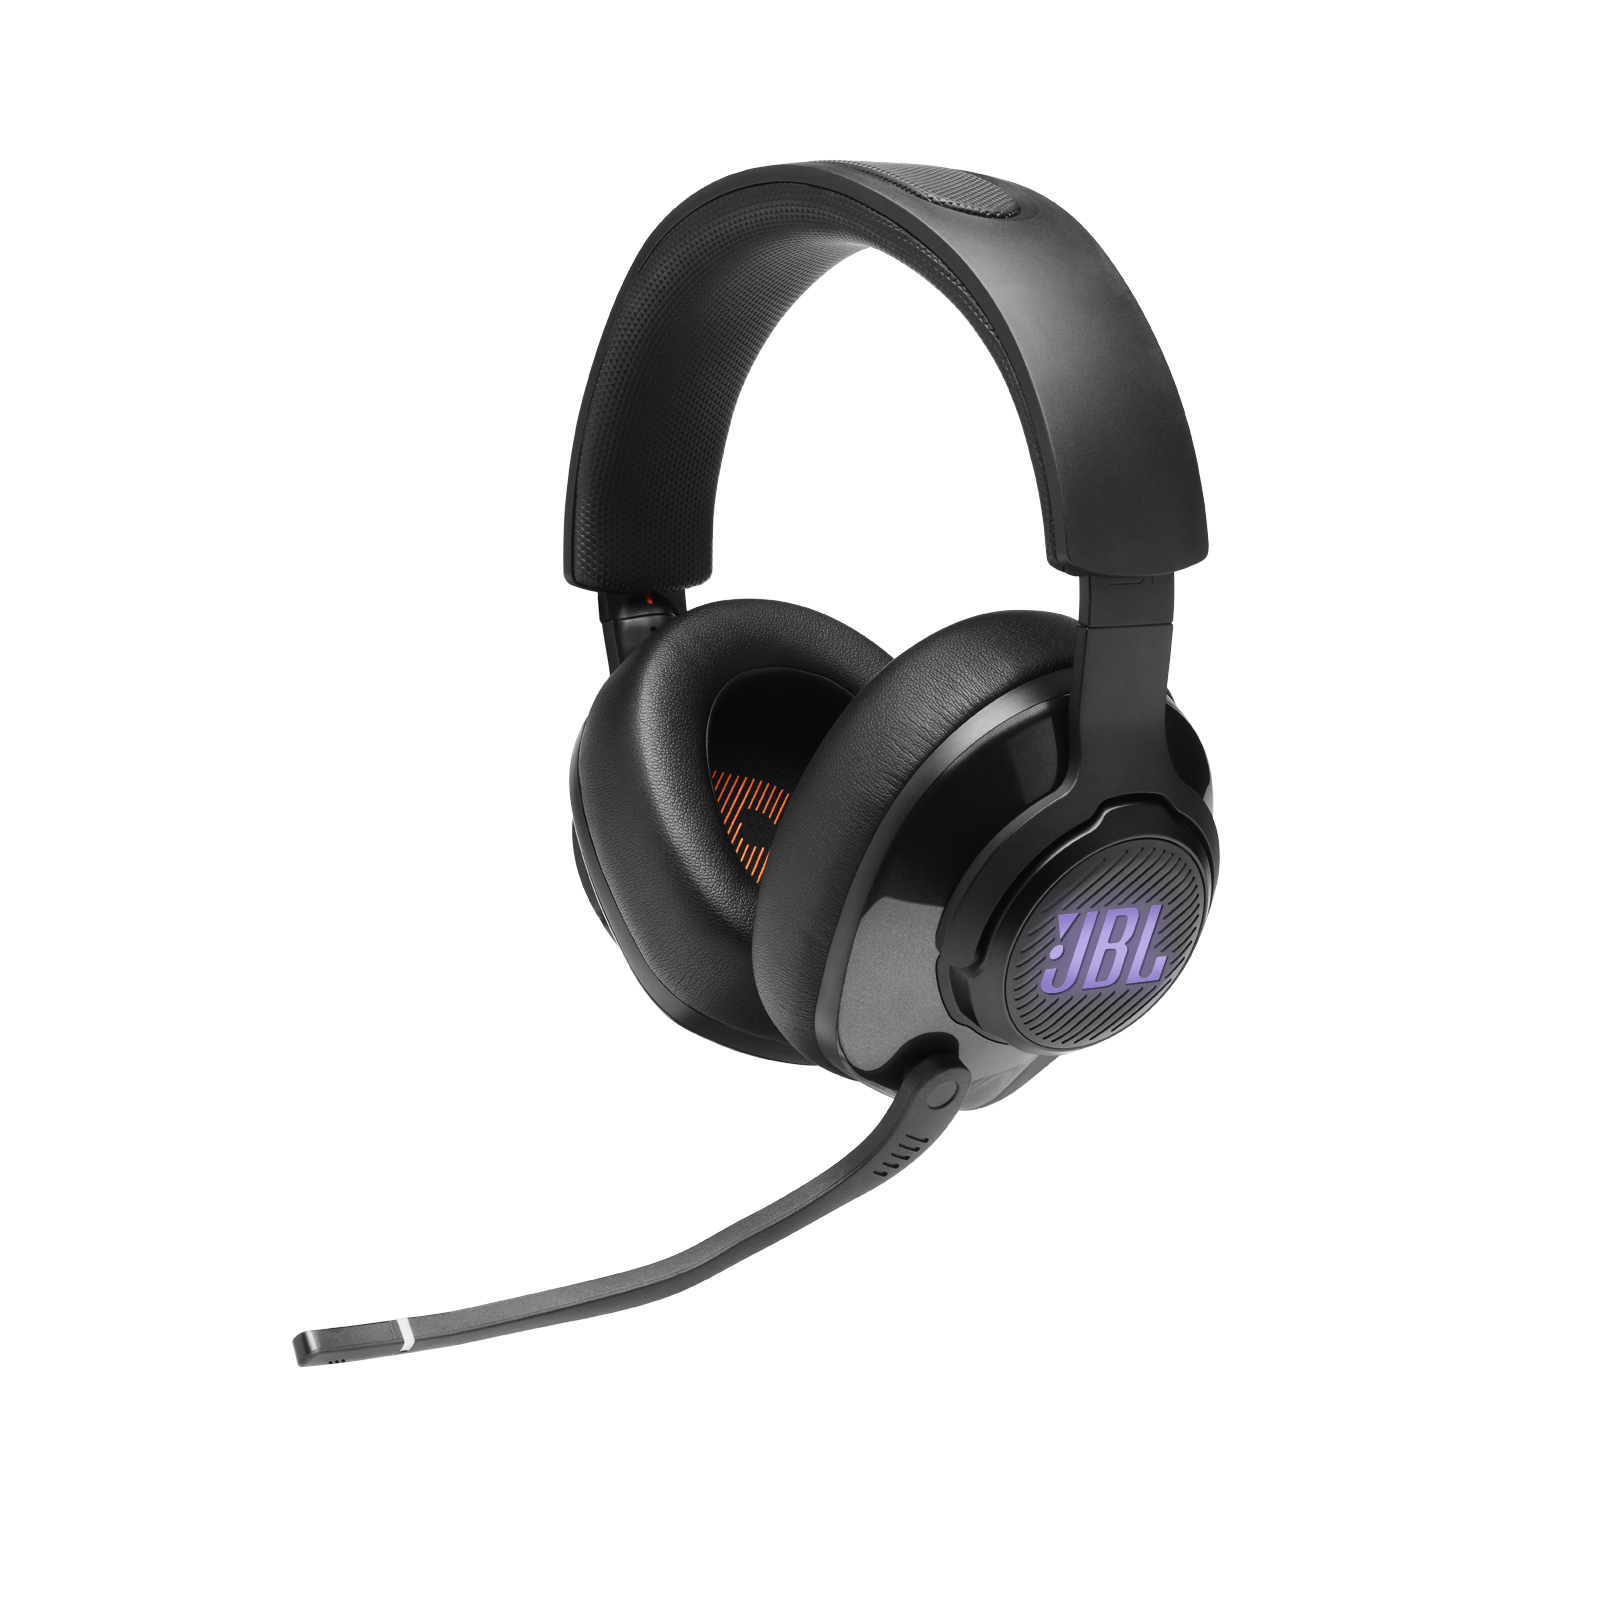 JBL Quantum 400 - Black - USB over-ear PC gaming headset with game-chat dial - Detailshot 3